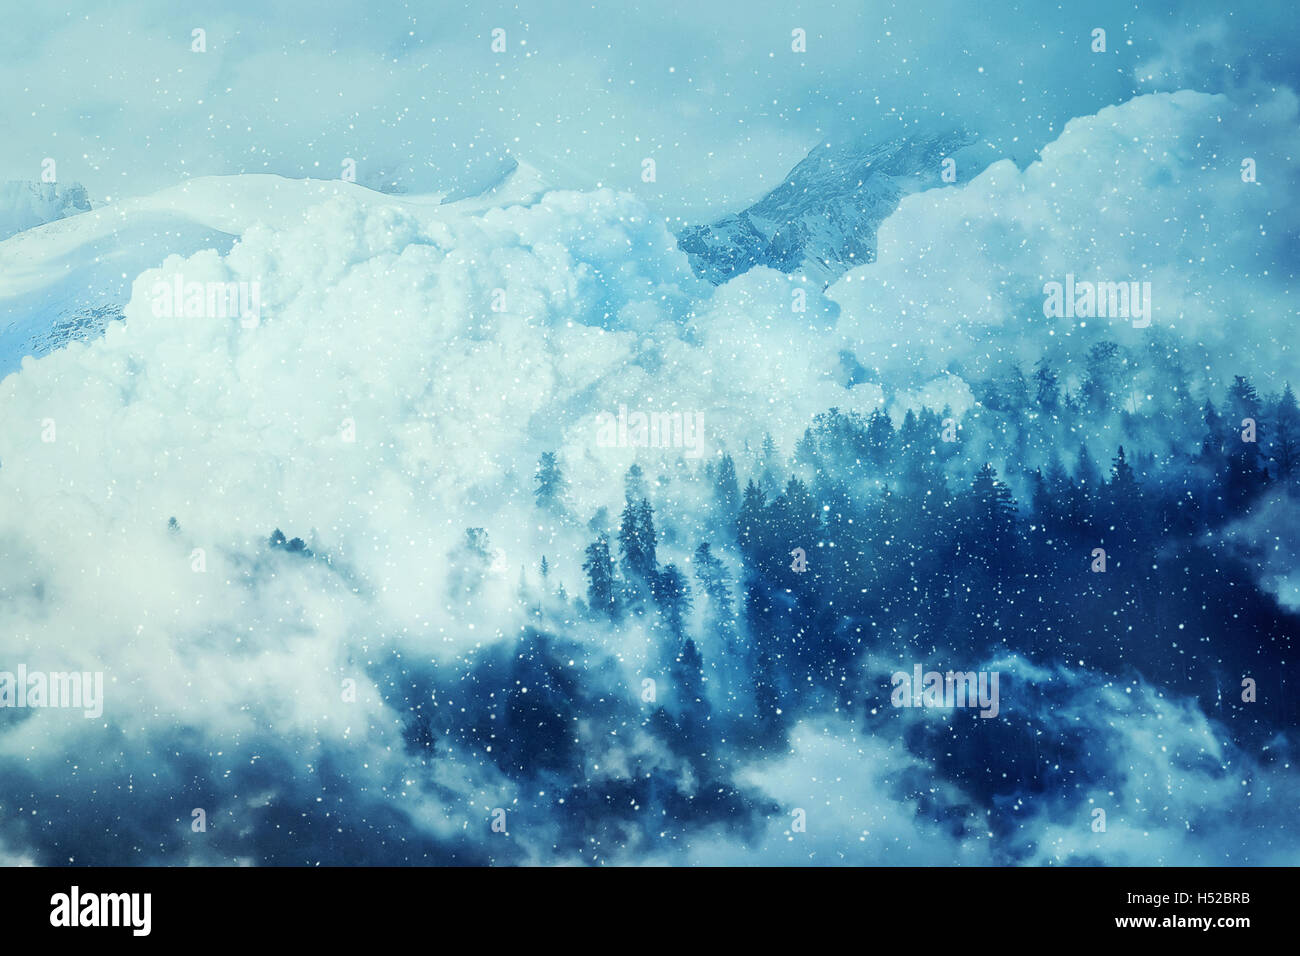 Fantastic winter background with an avalanche in the snowy mountains. Beautiful landscape mist and snowfall in the fir forest. T Stock Photo